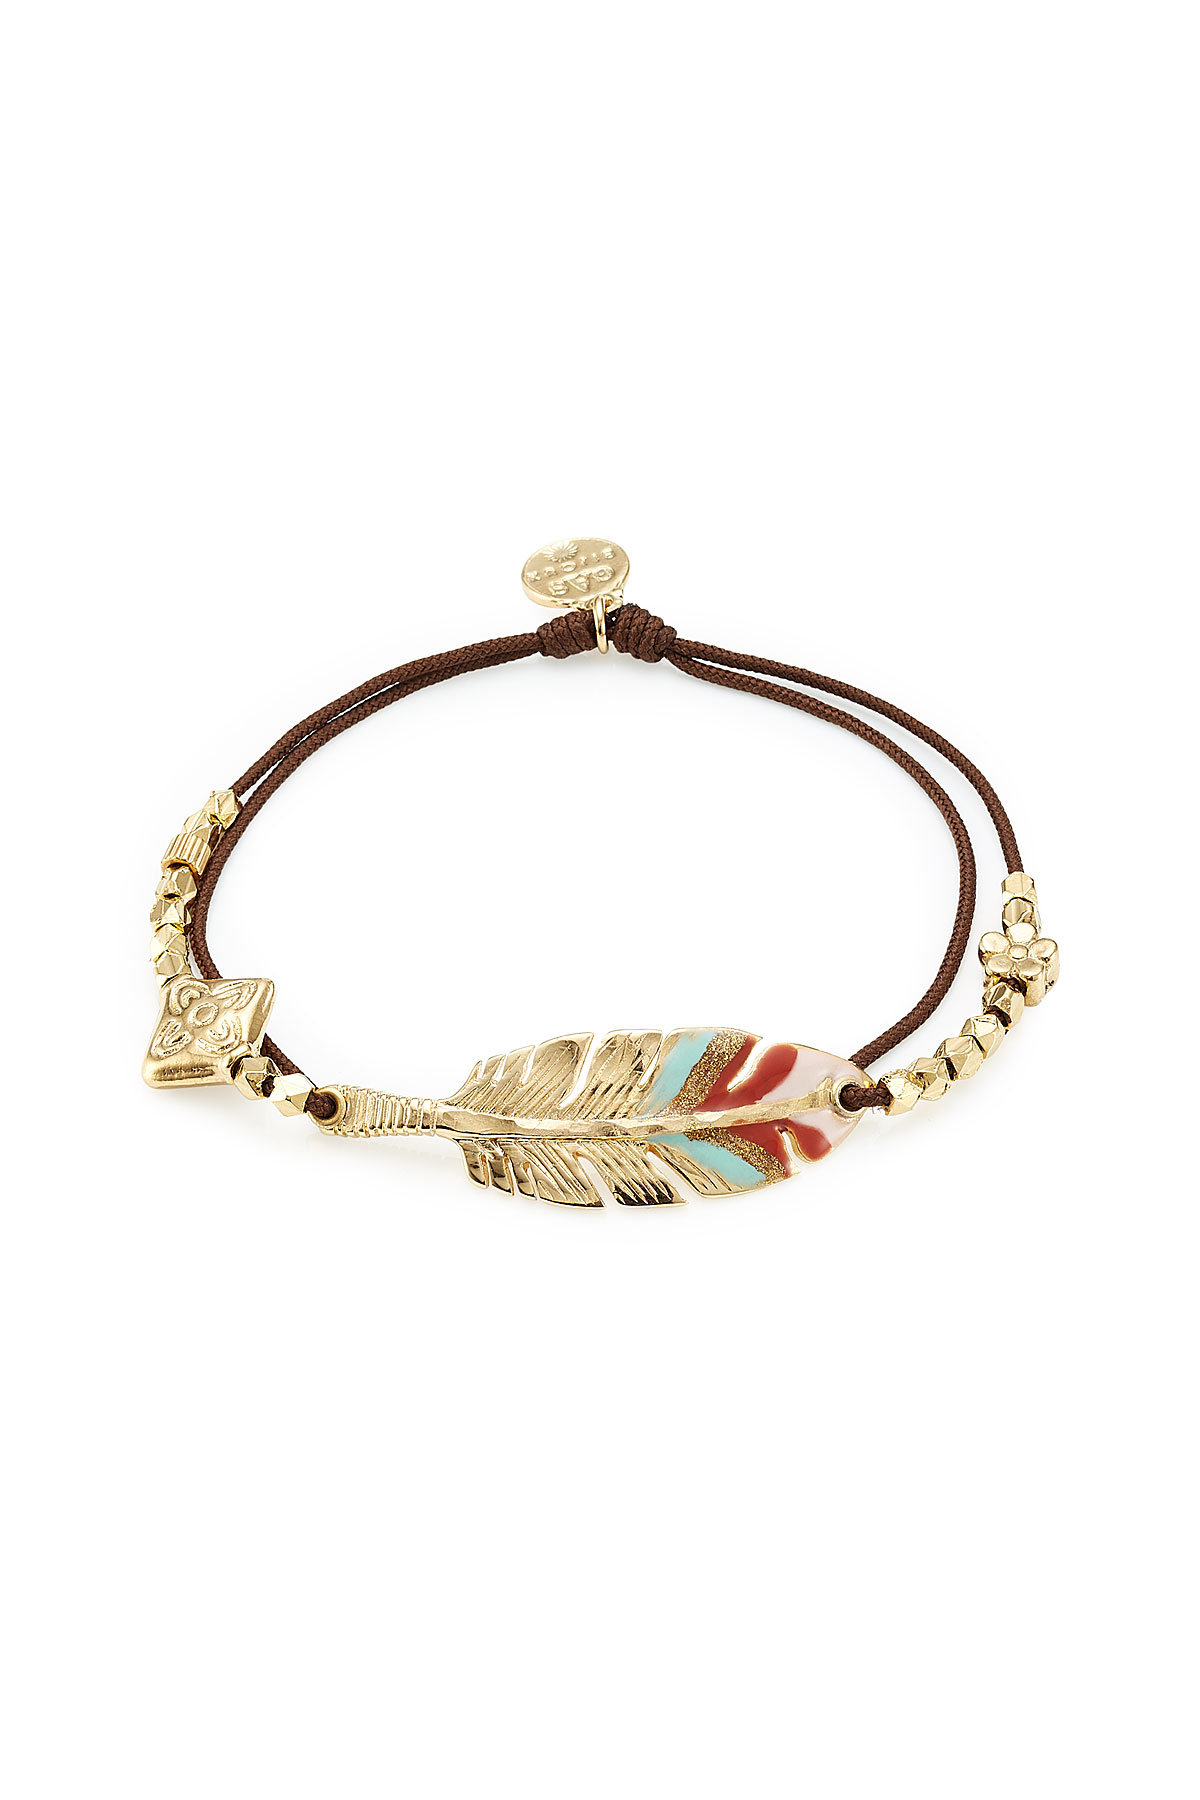 Penna Bracelet with 24kt Gold-Plated Embellishment by Gas Bijoux